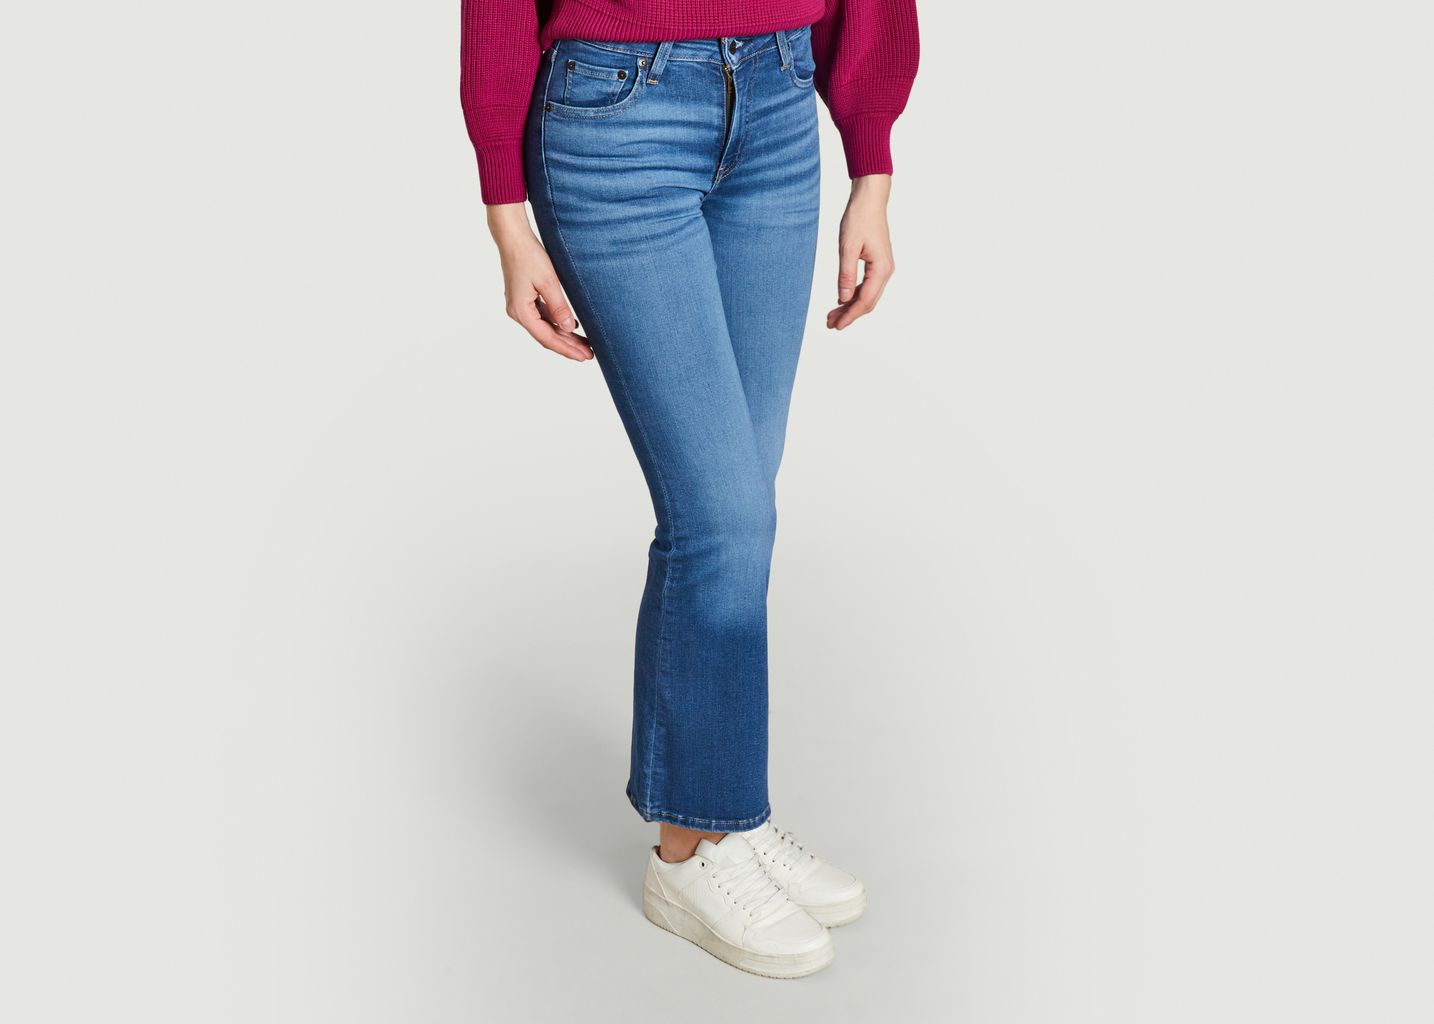 Jeans 726™ flare - Levi's Red Tab